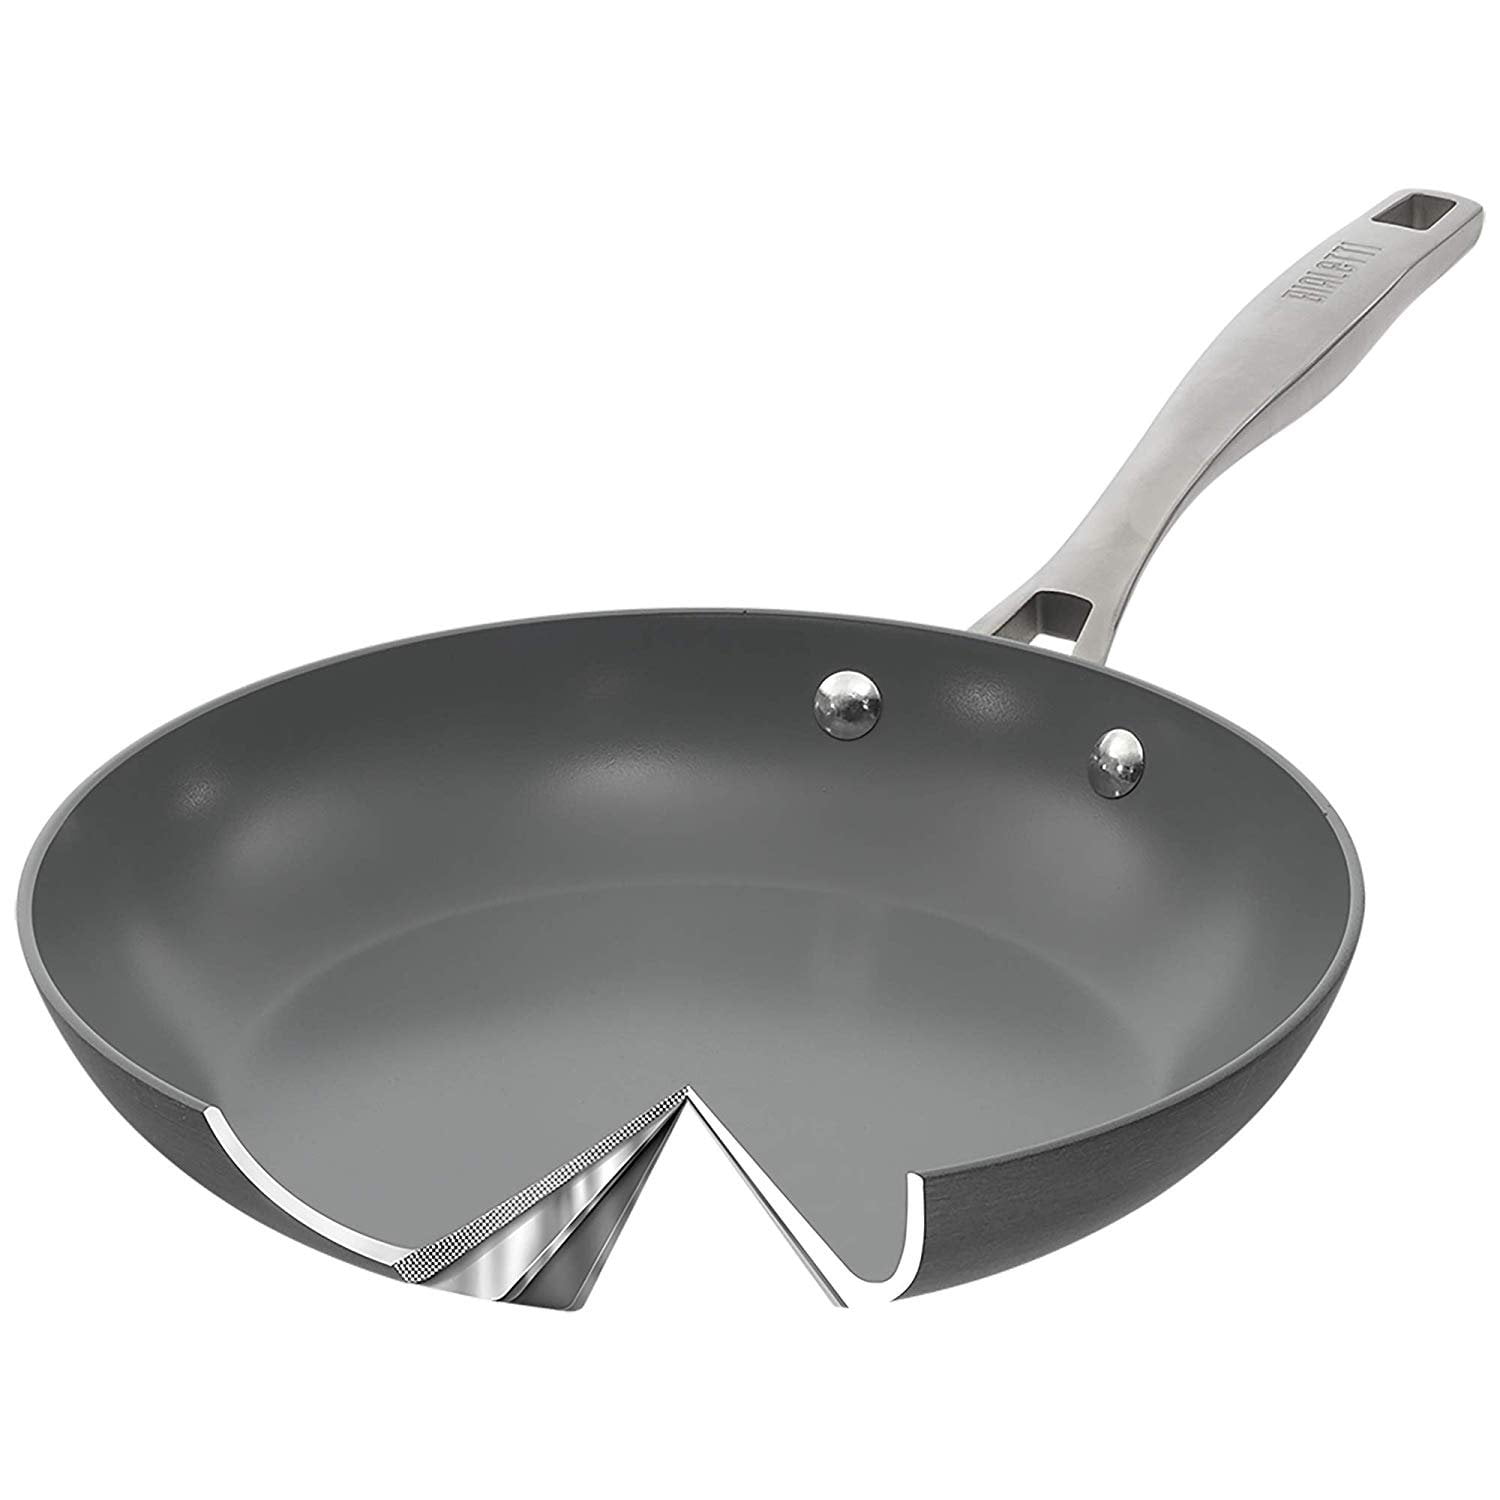 New Bialetti 10 Inch Frying Pan Skillet - Model No 07263 - Free Shipping